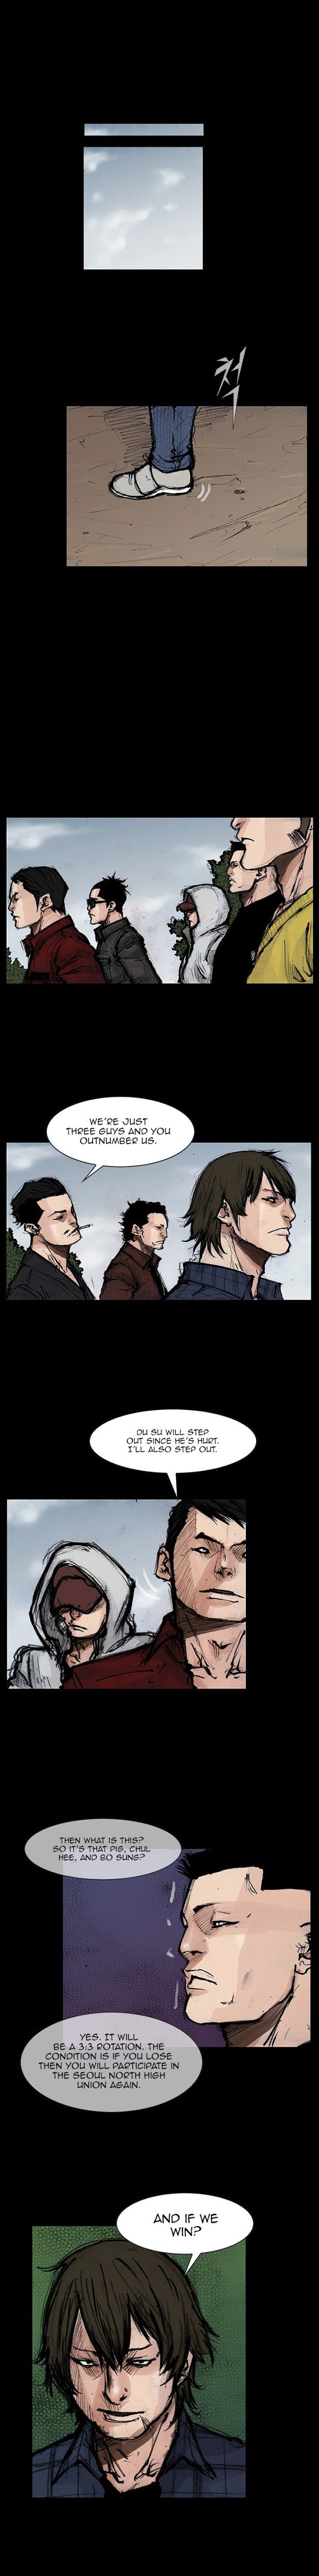 Dokgo 2 Chapter 17 Page 6